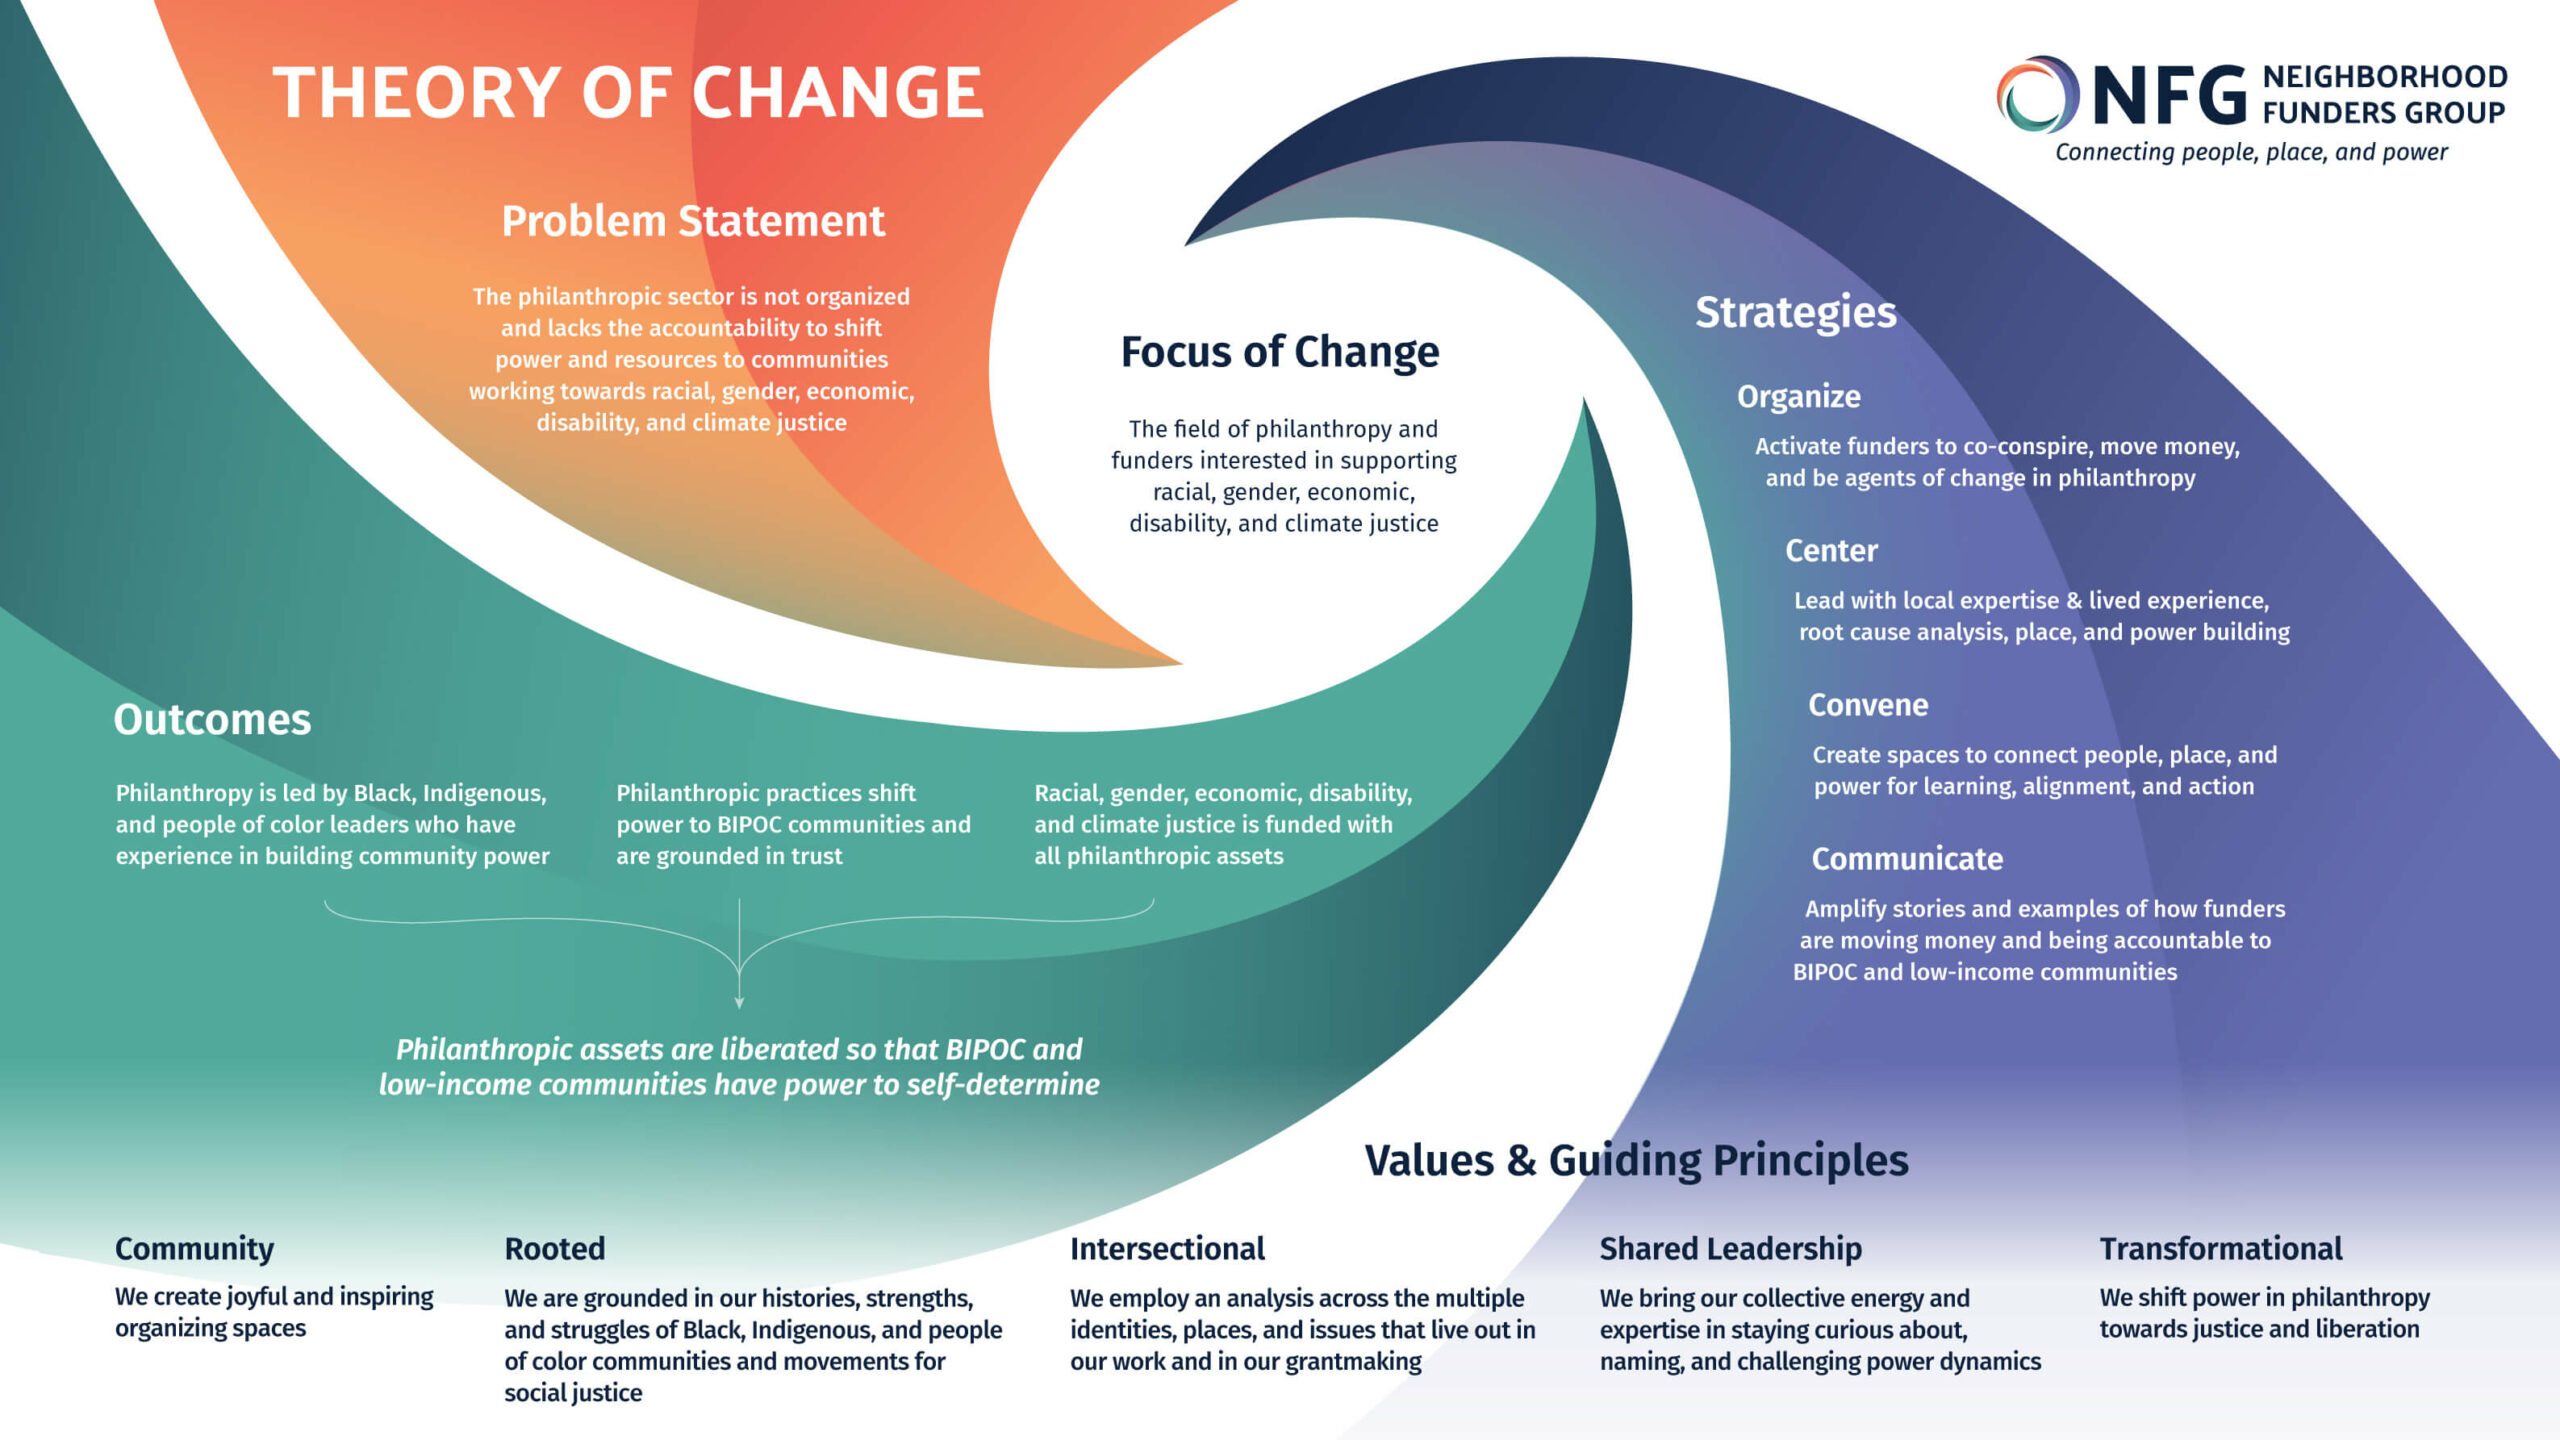 [Summary] Theory of change graphic. Problem statement: The philanthropic sector is not organized and lacks the accountability to shift power and resources to communities working towards racial, gender, economic, disability, and climate justice. Outcome: Philanthropic assets are liberated so that BIPOC and low-income communities have power to self-determine.